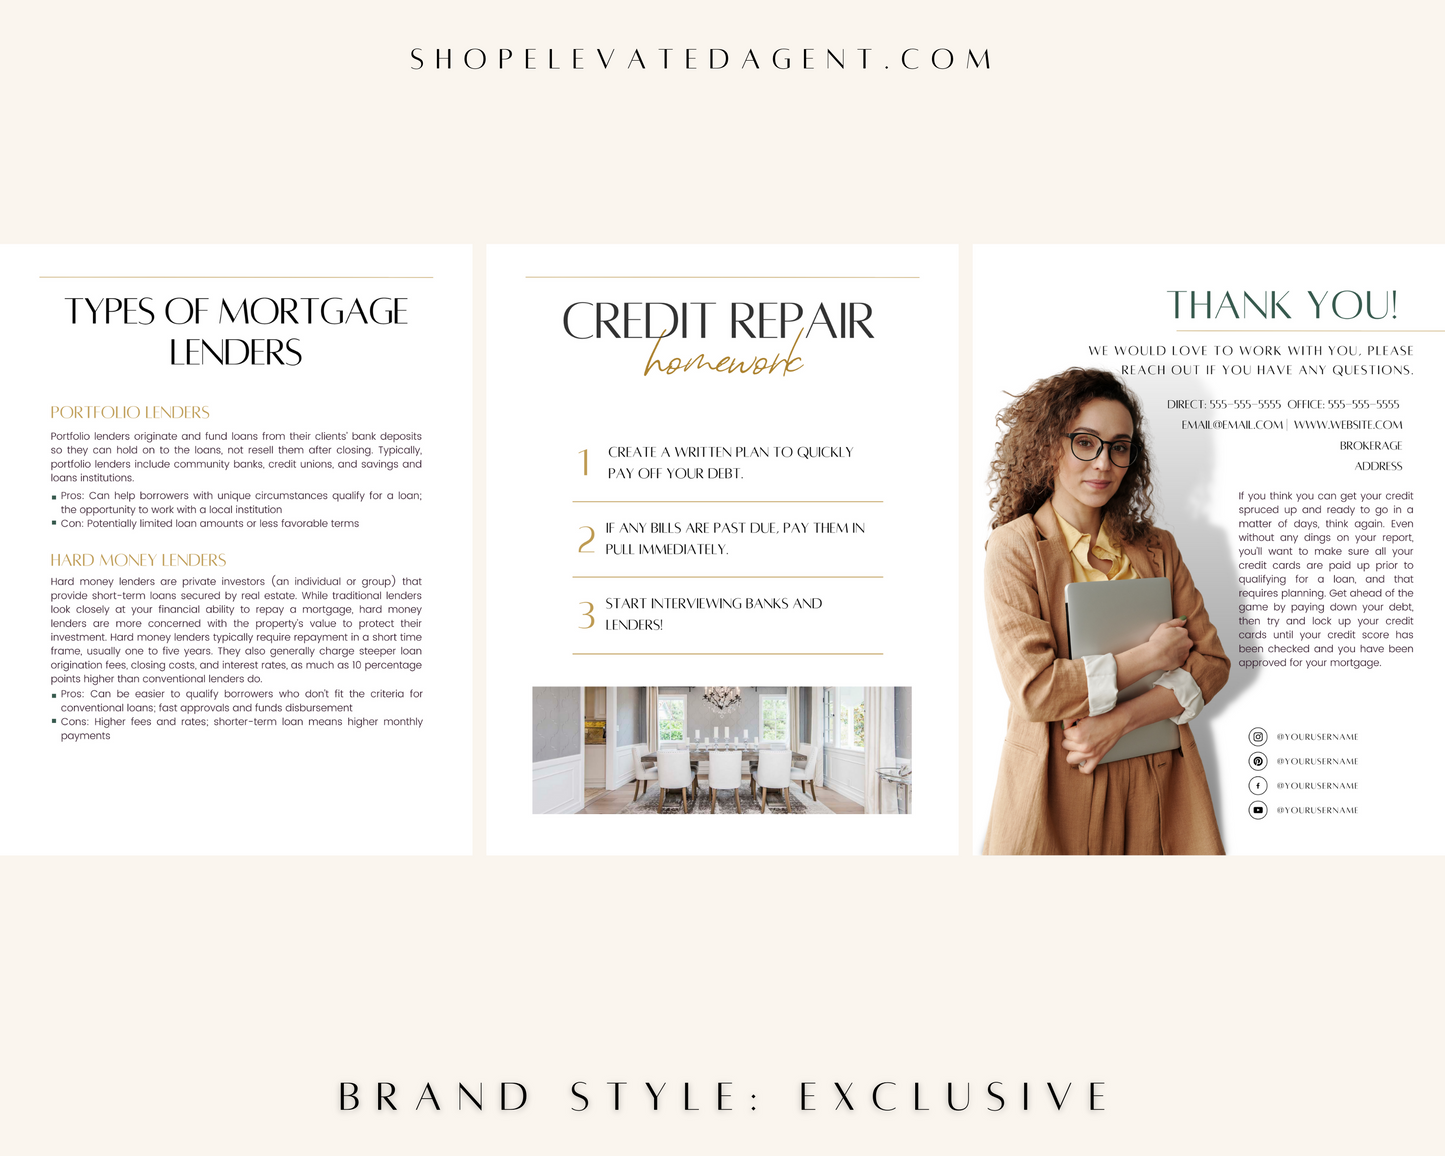 Credit Repair Guide - Exclusive Brand Style